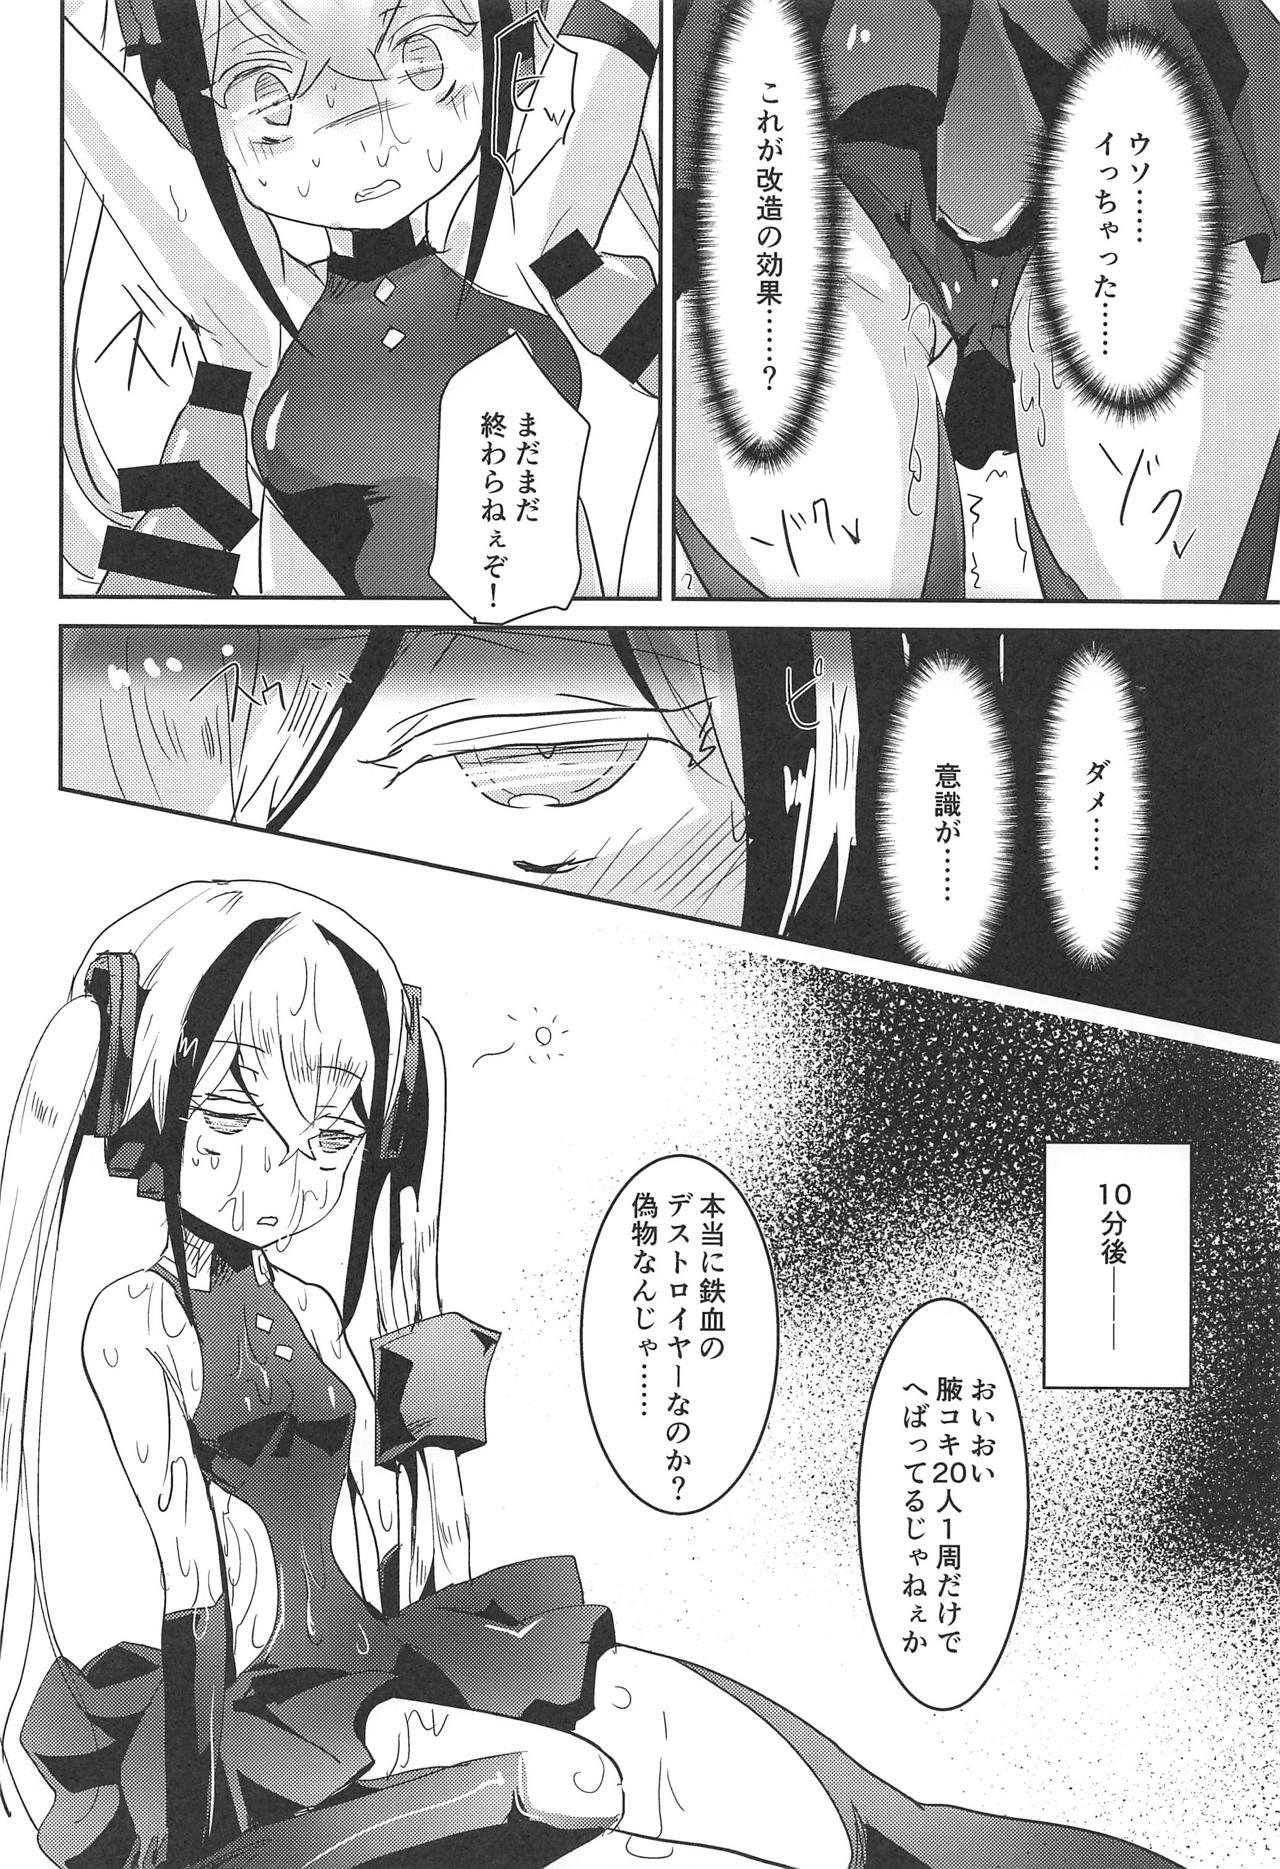 Soles Miserable Dolls - Girls frontline Duro - Page 11